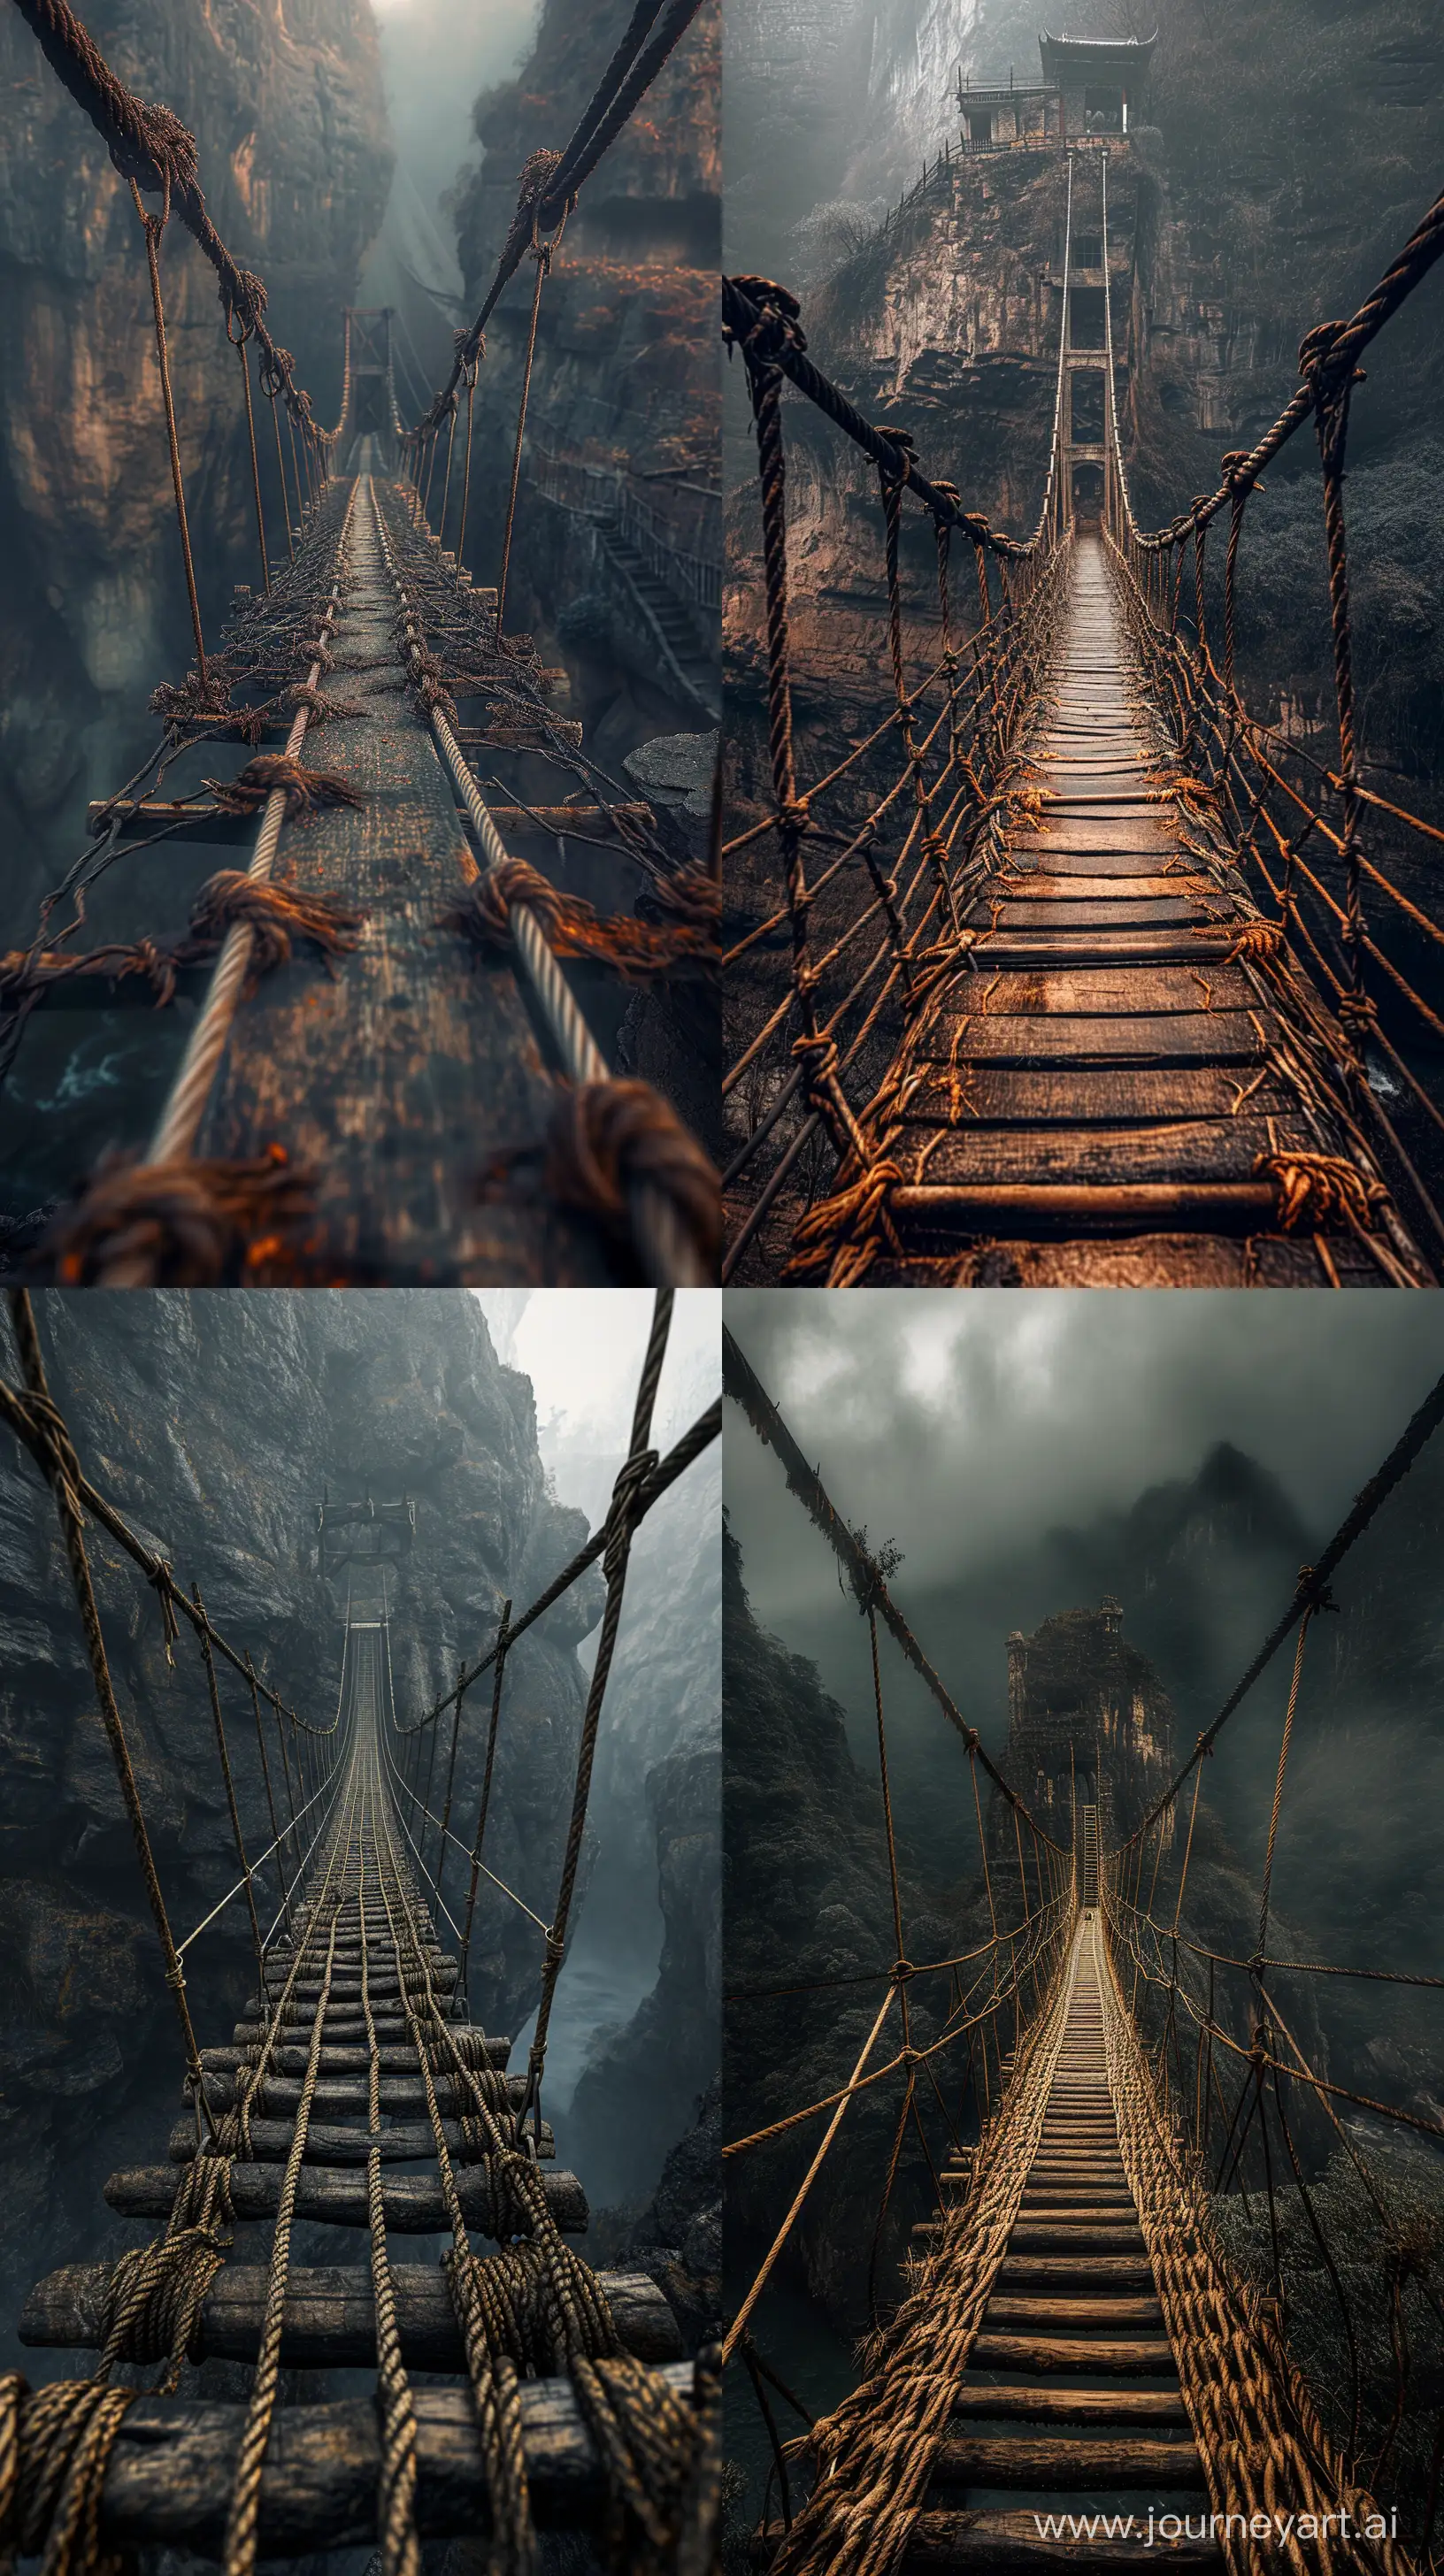 Eerie-FirstPerson-View-from-Suspended-Rope-Bridge-in-8K